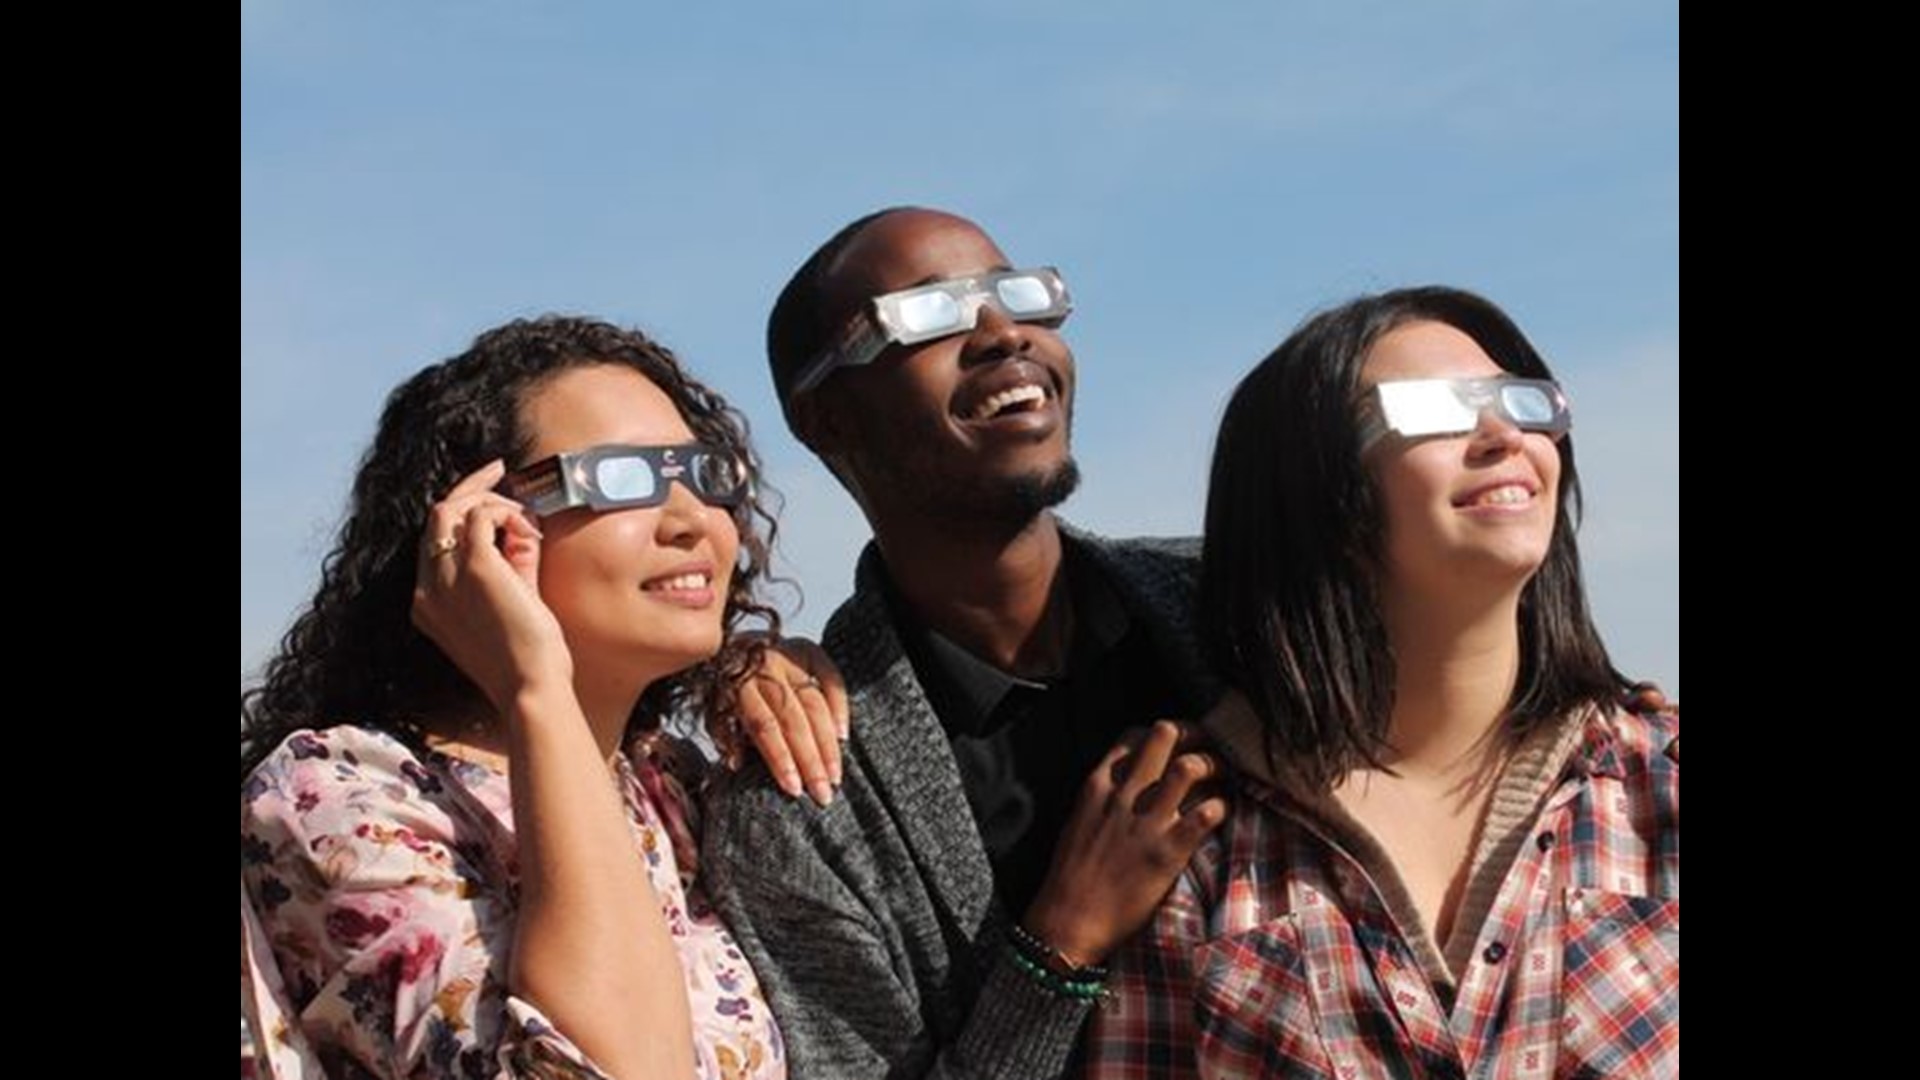 'Eclipse blindness' is a real thing. Here's how to watch the solar